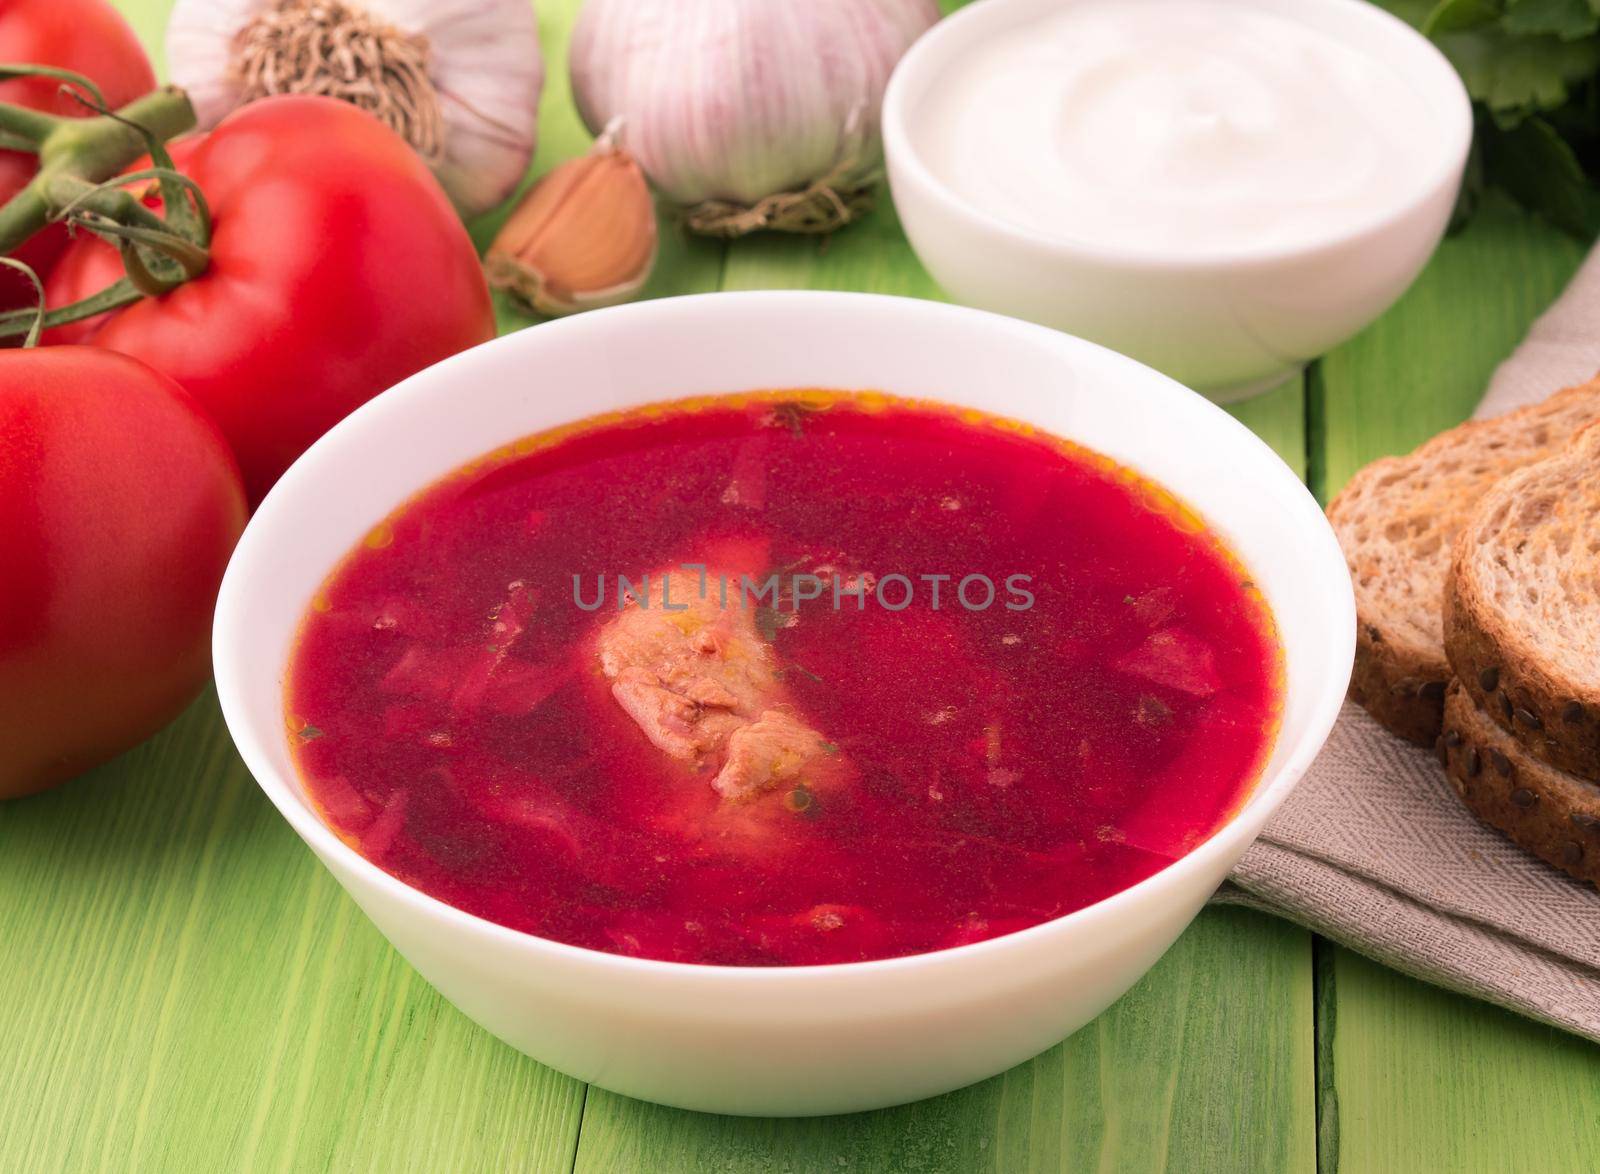 borscht - a soup based on beet by NataBene